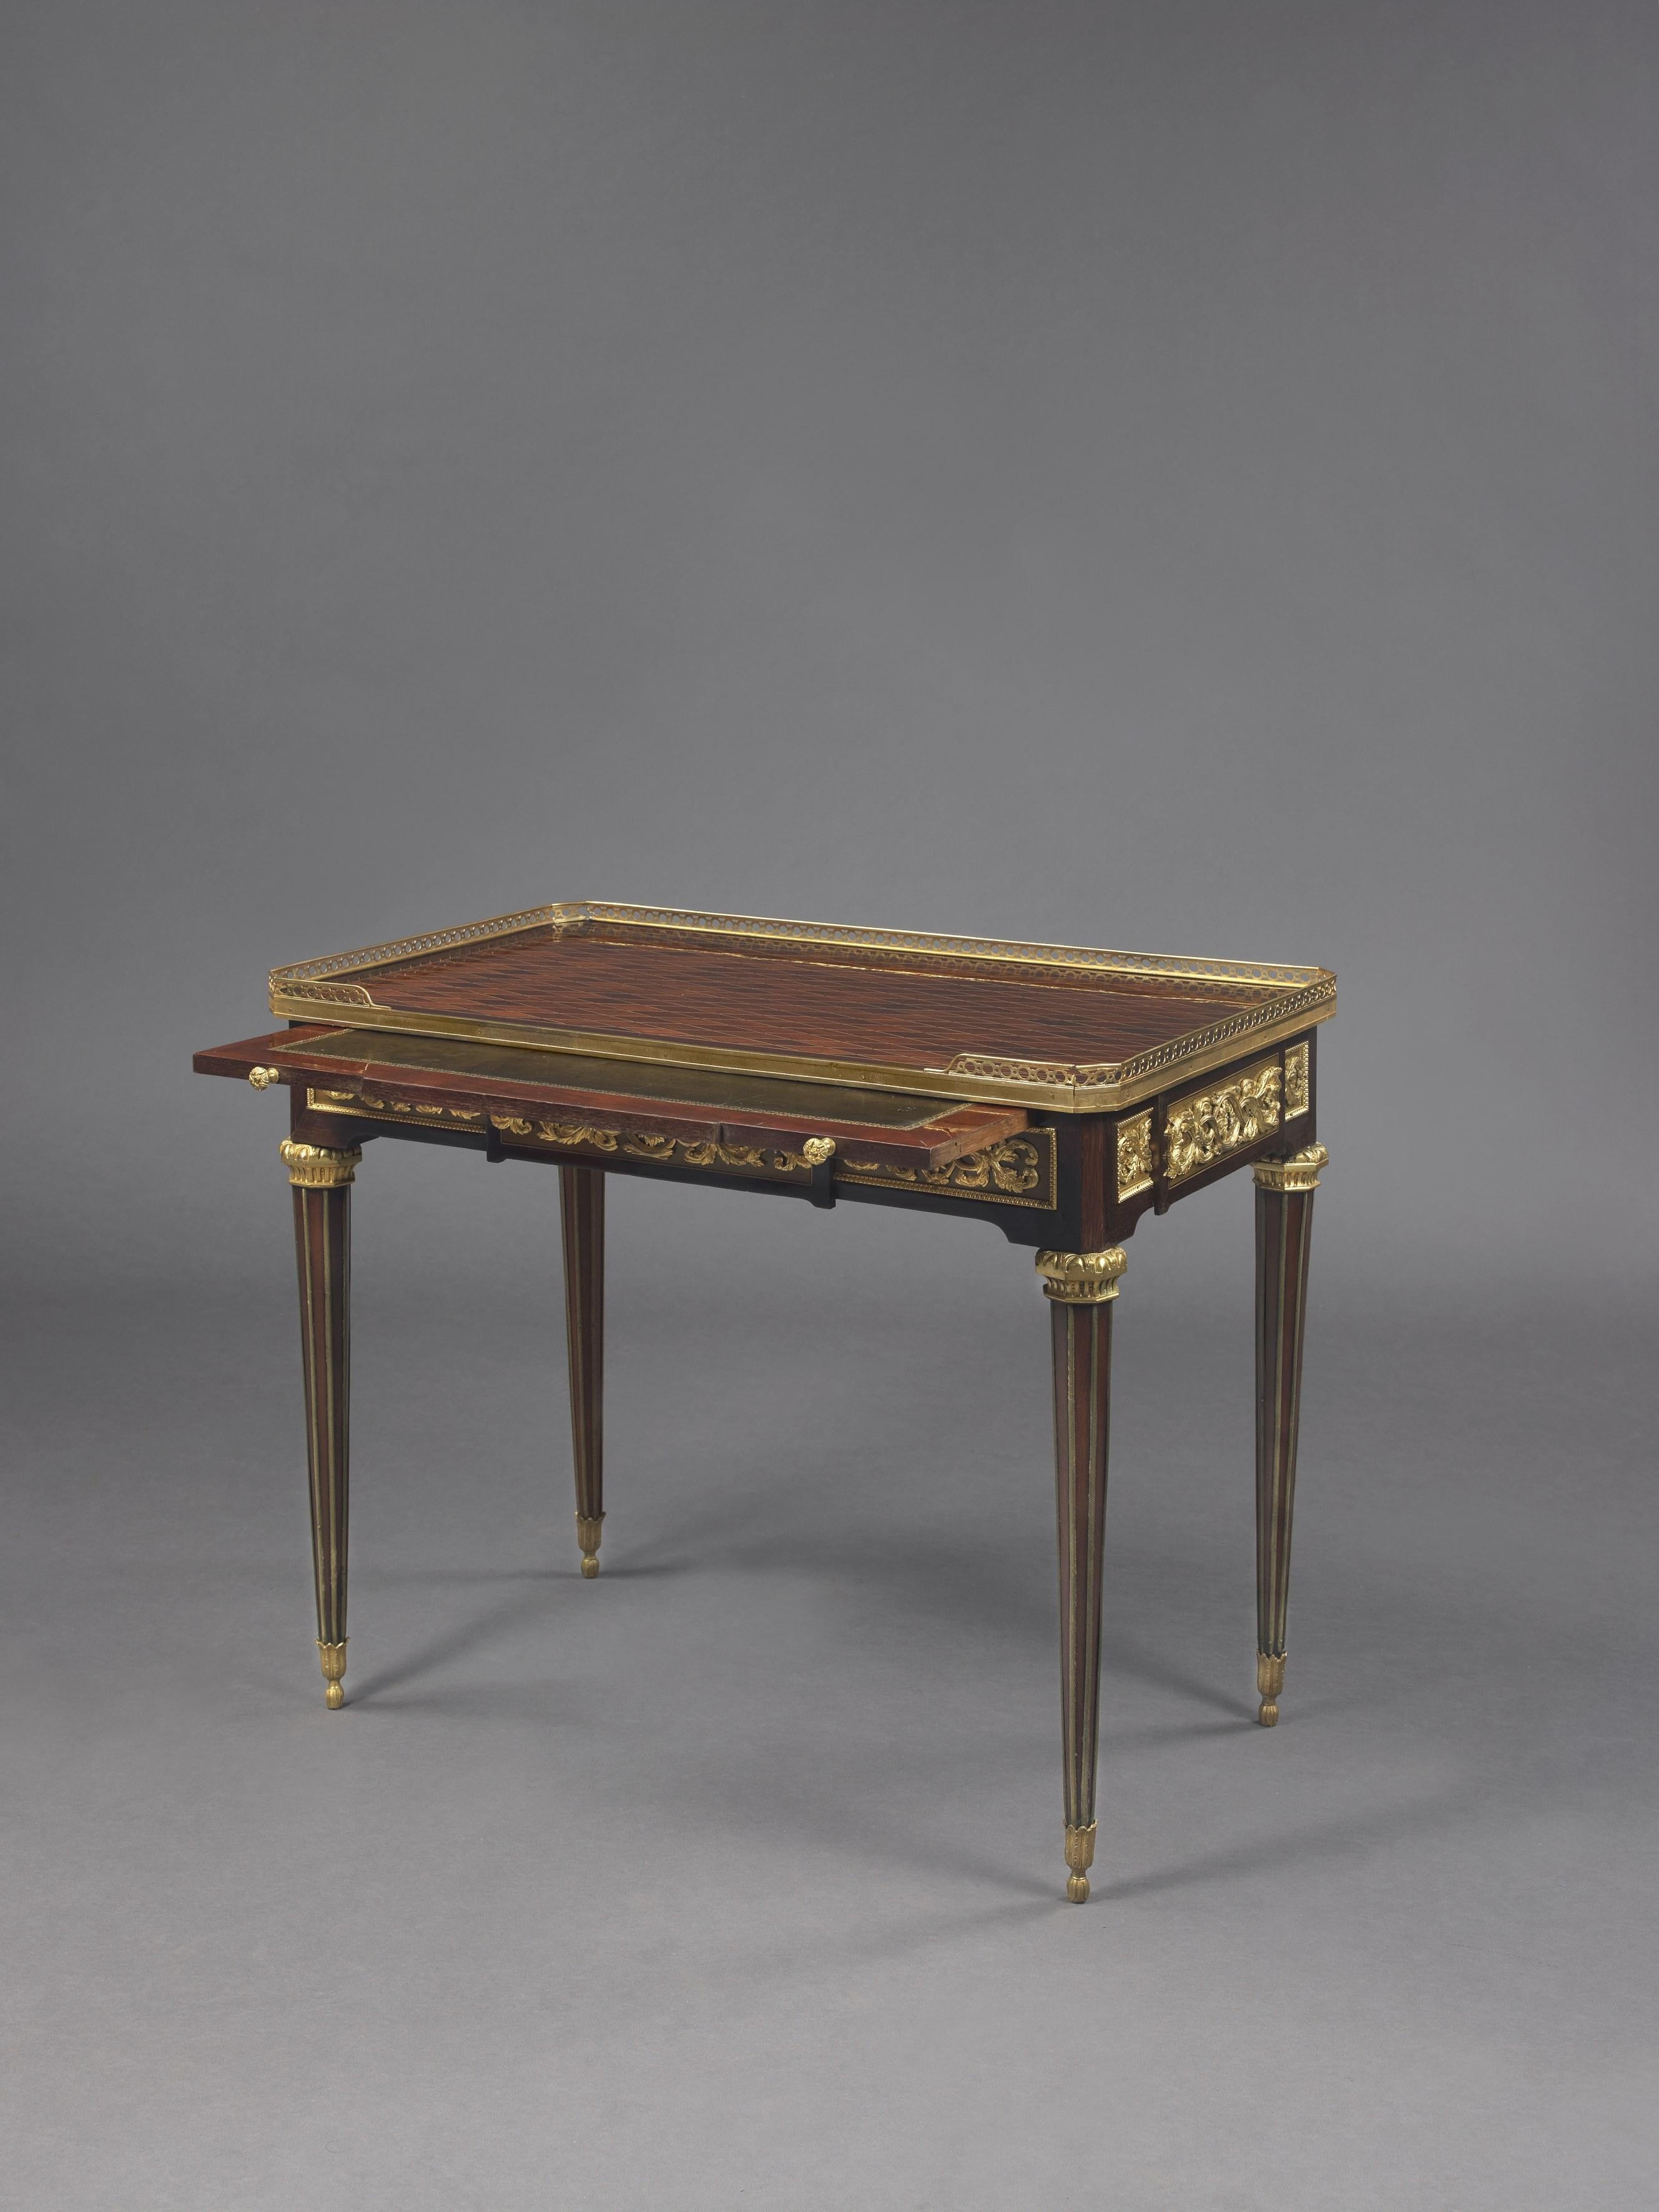 French Louis XVI Style Mahogany Gilt Bronze Centre Table by Paul Sormani, circa 1890 For Sale